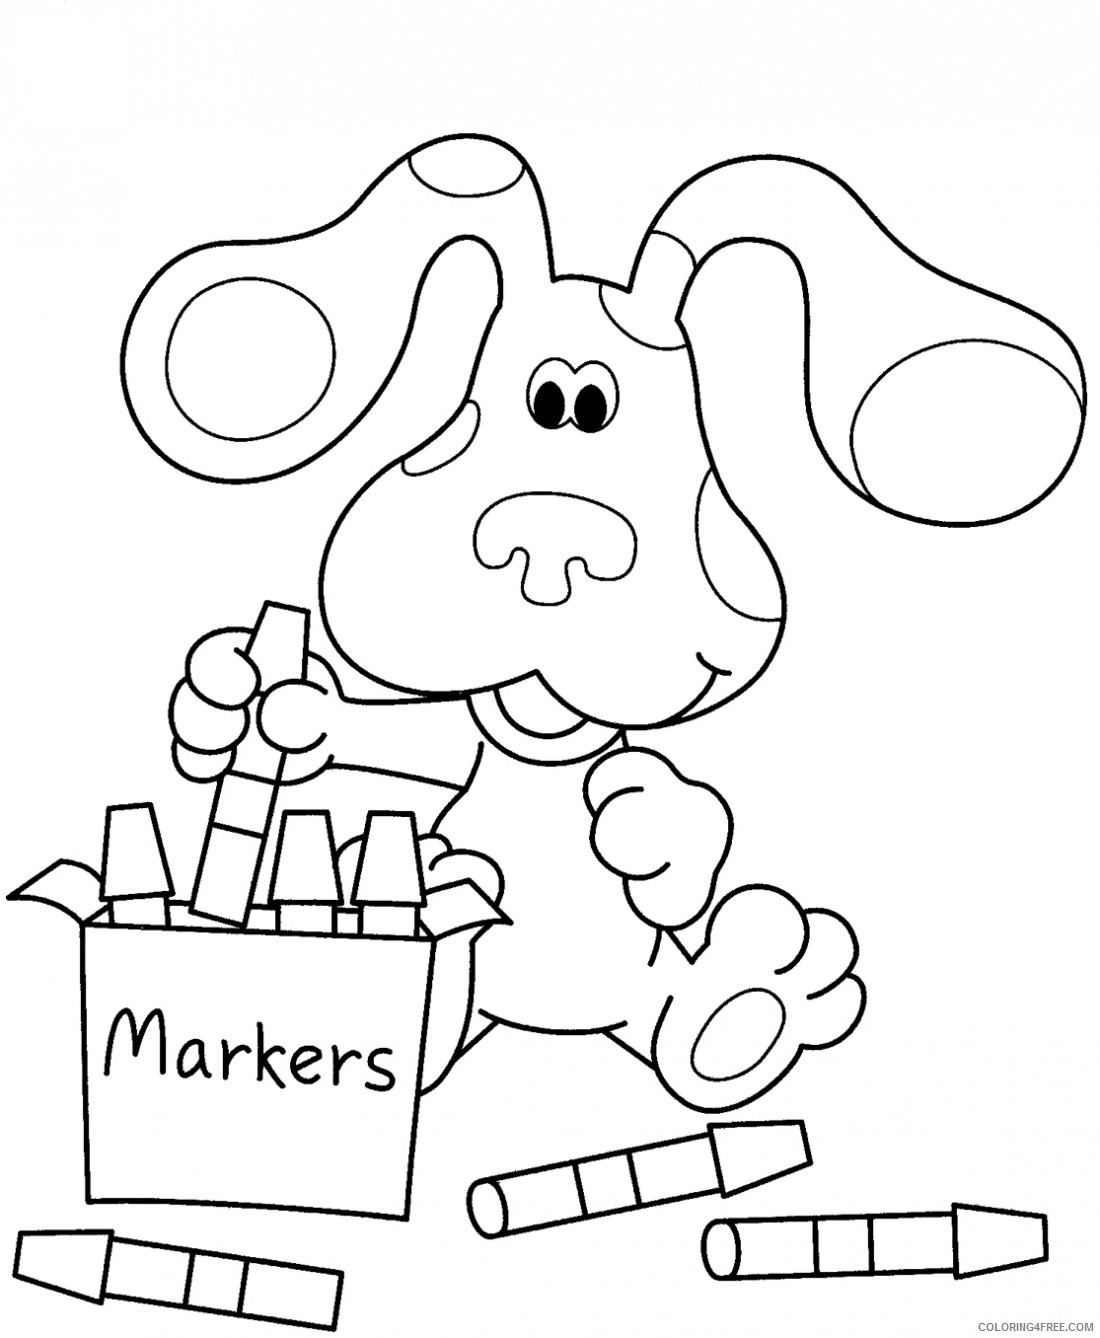 crayon coloring pages blues clues Coloring4free